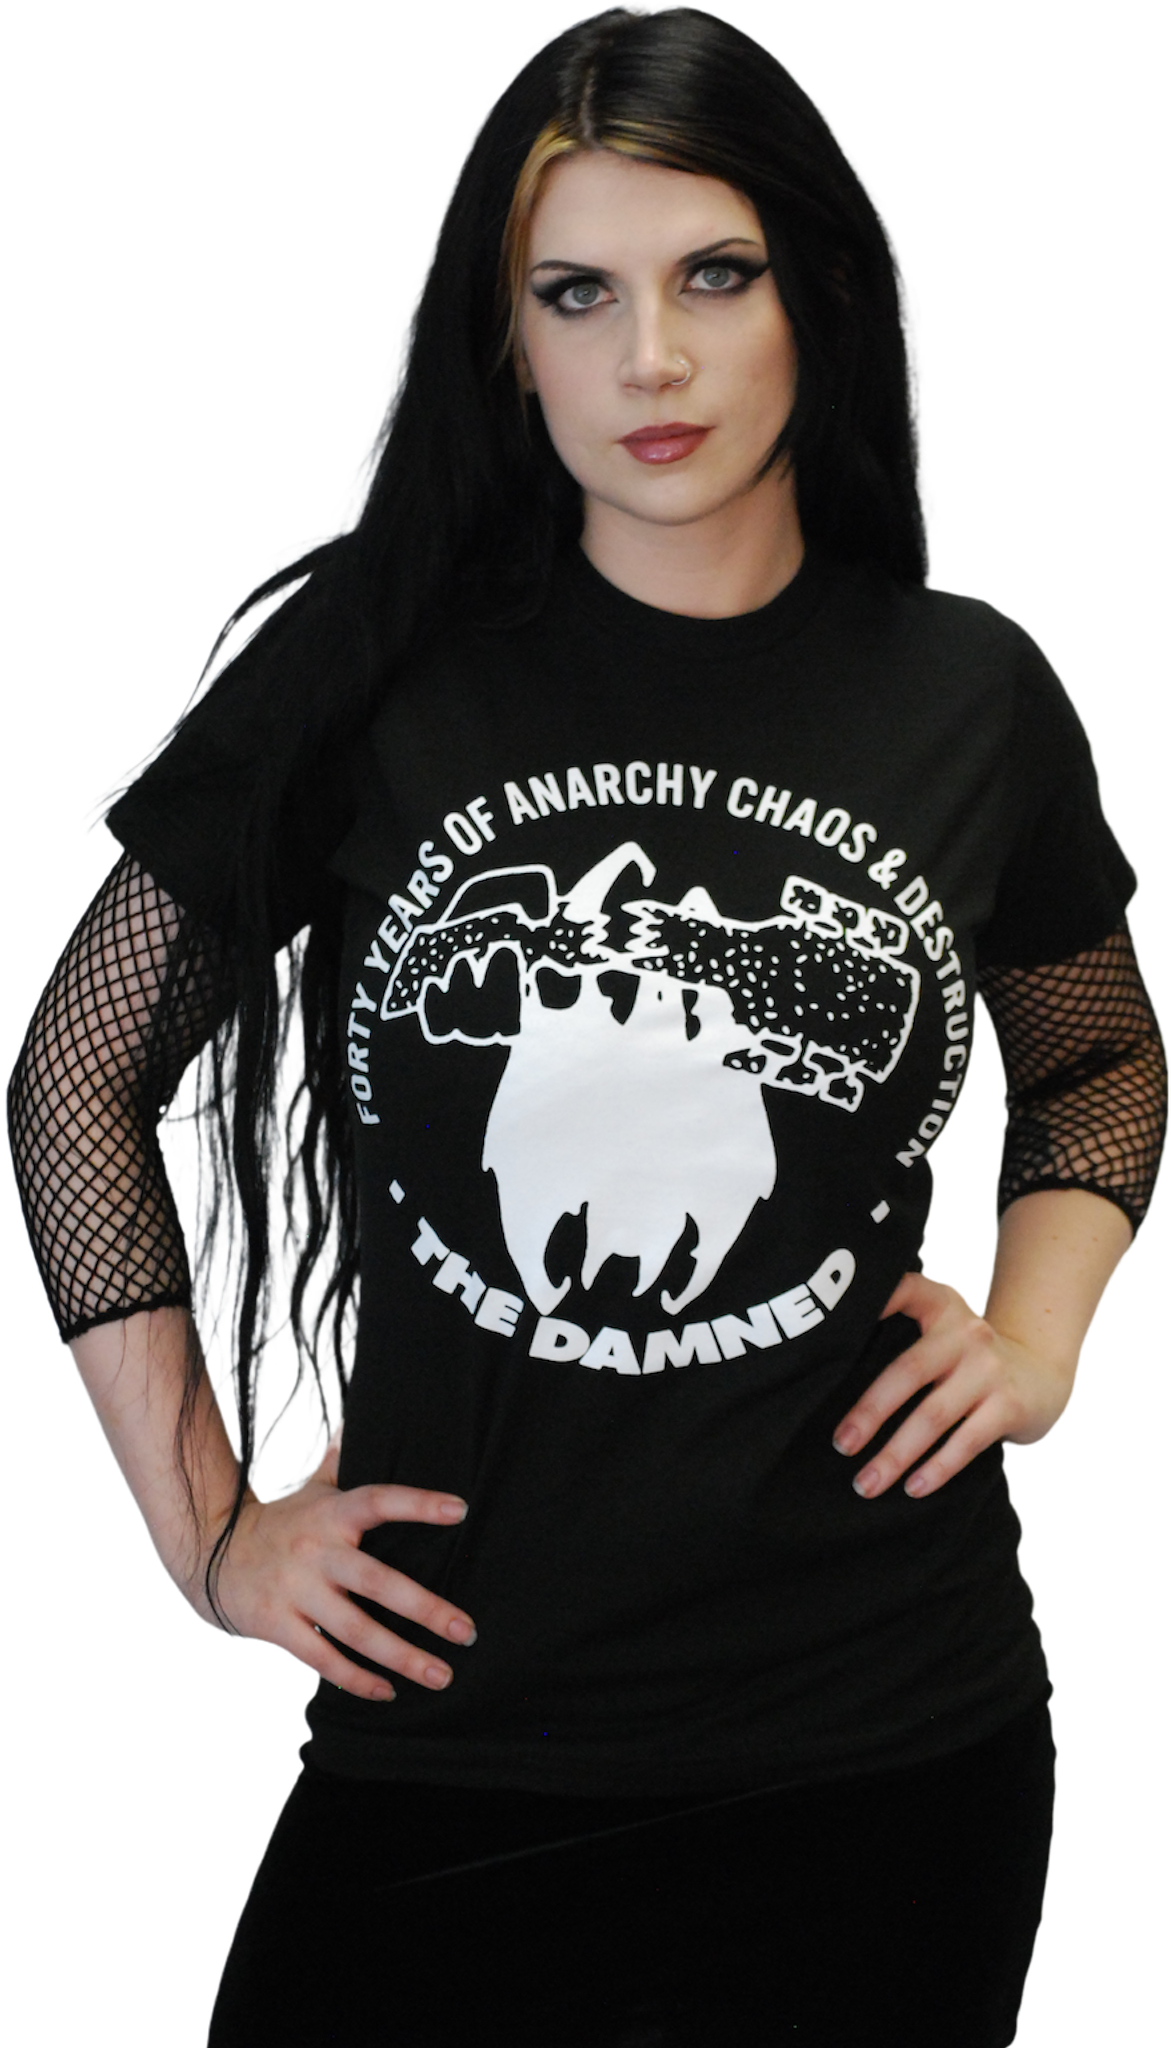 DAMNED: "FORTY YEARS OF ANARCHY, CHAOS AND DESTRUCTION" T-SHIRT